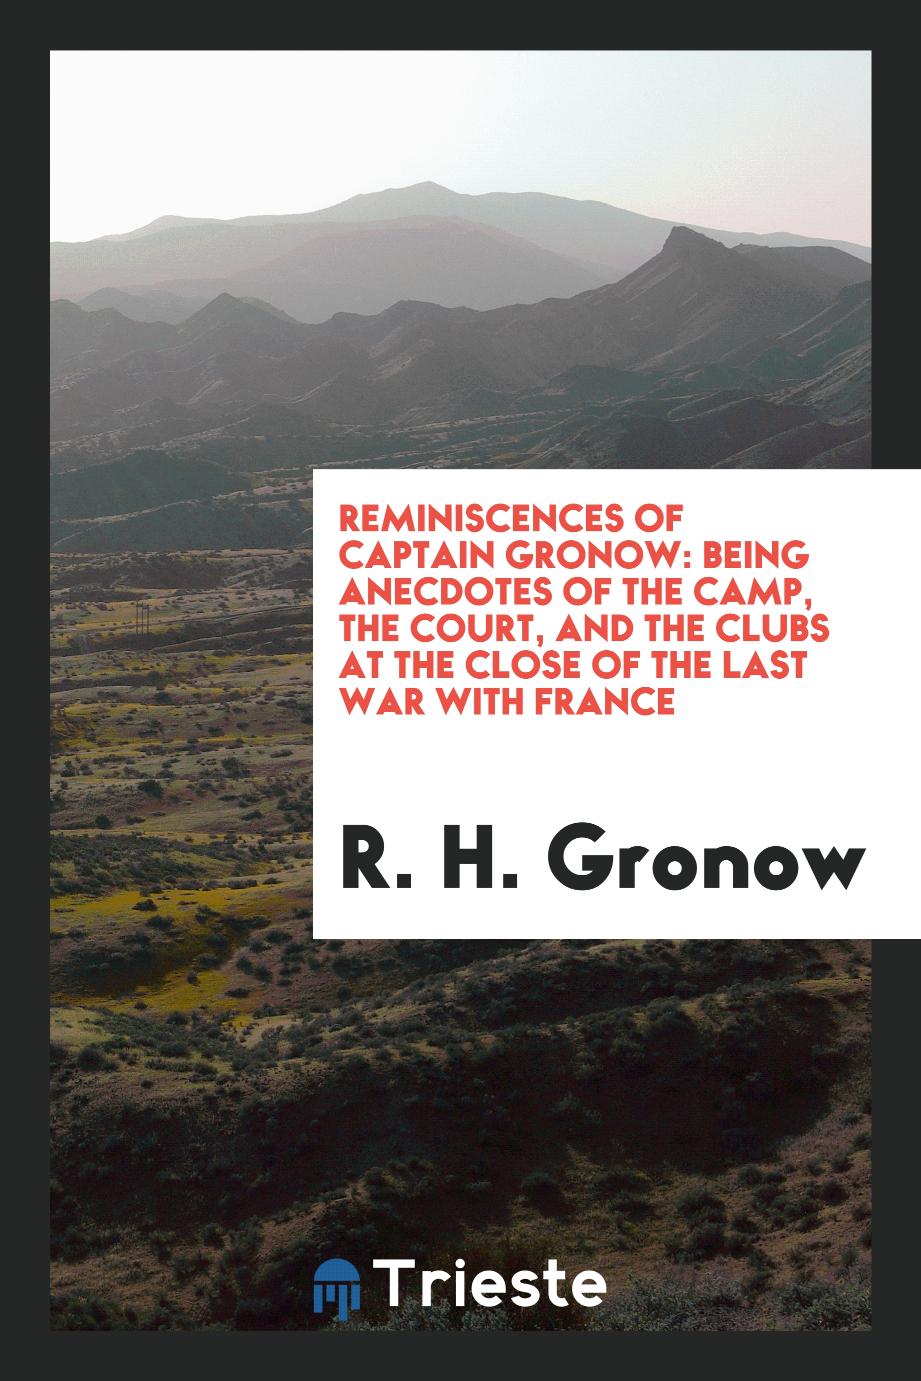 Reminiscences of Captain Gronow: Being Anecdotes of the Camp, the Court, and the Clubs at the Close of the Last War with France